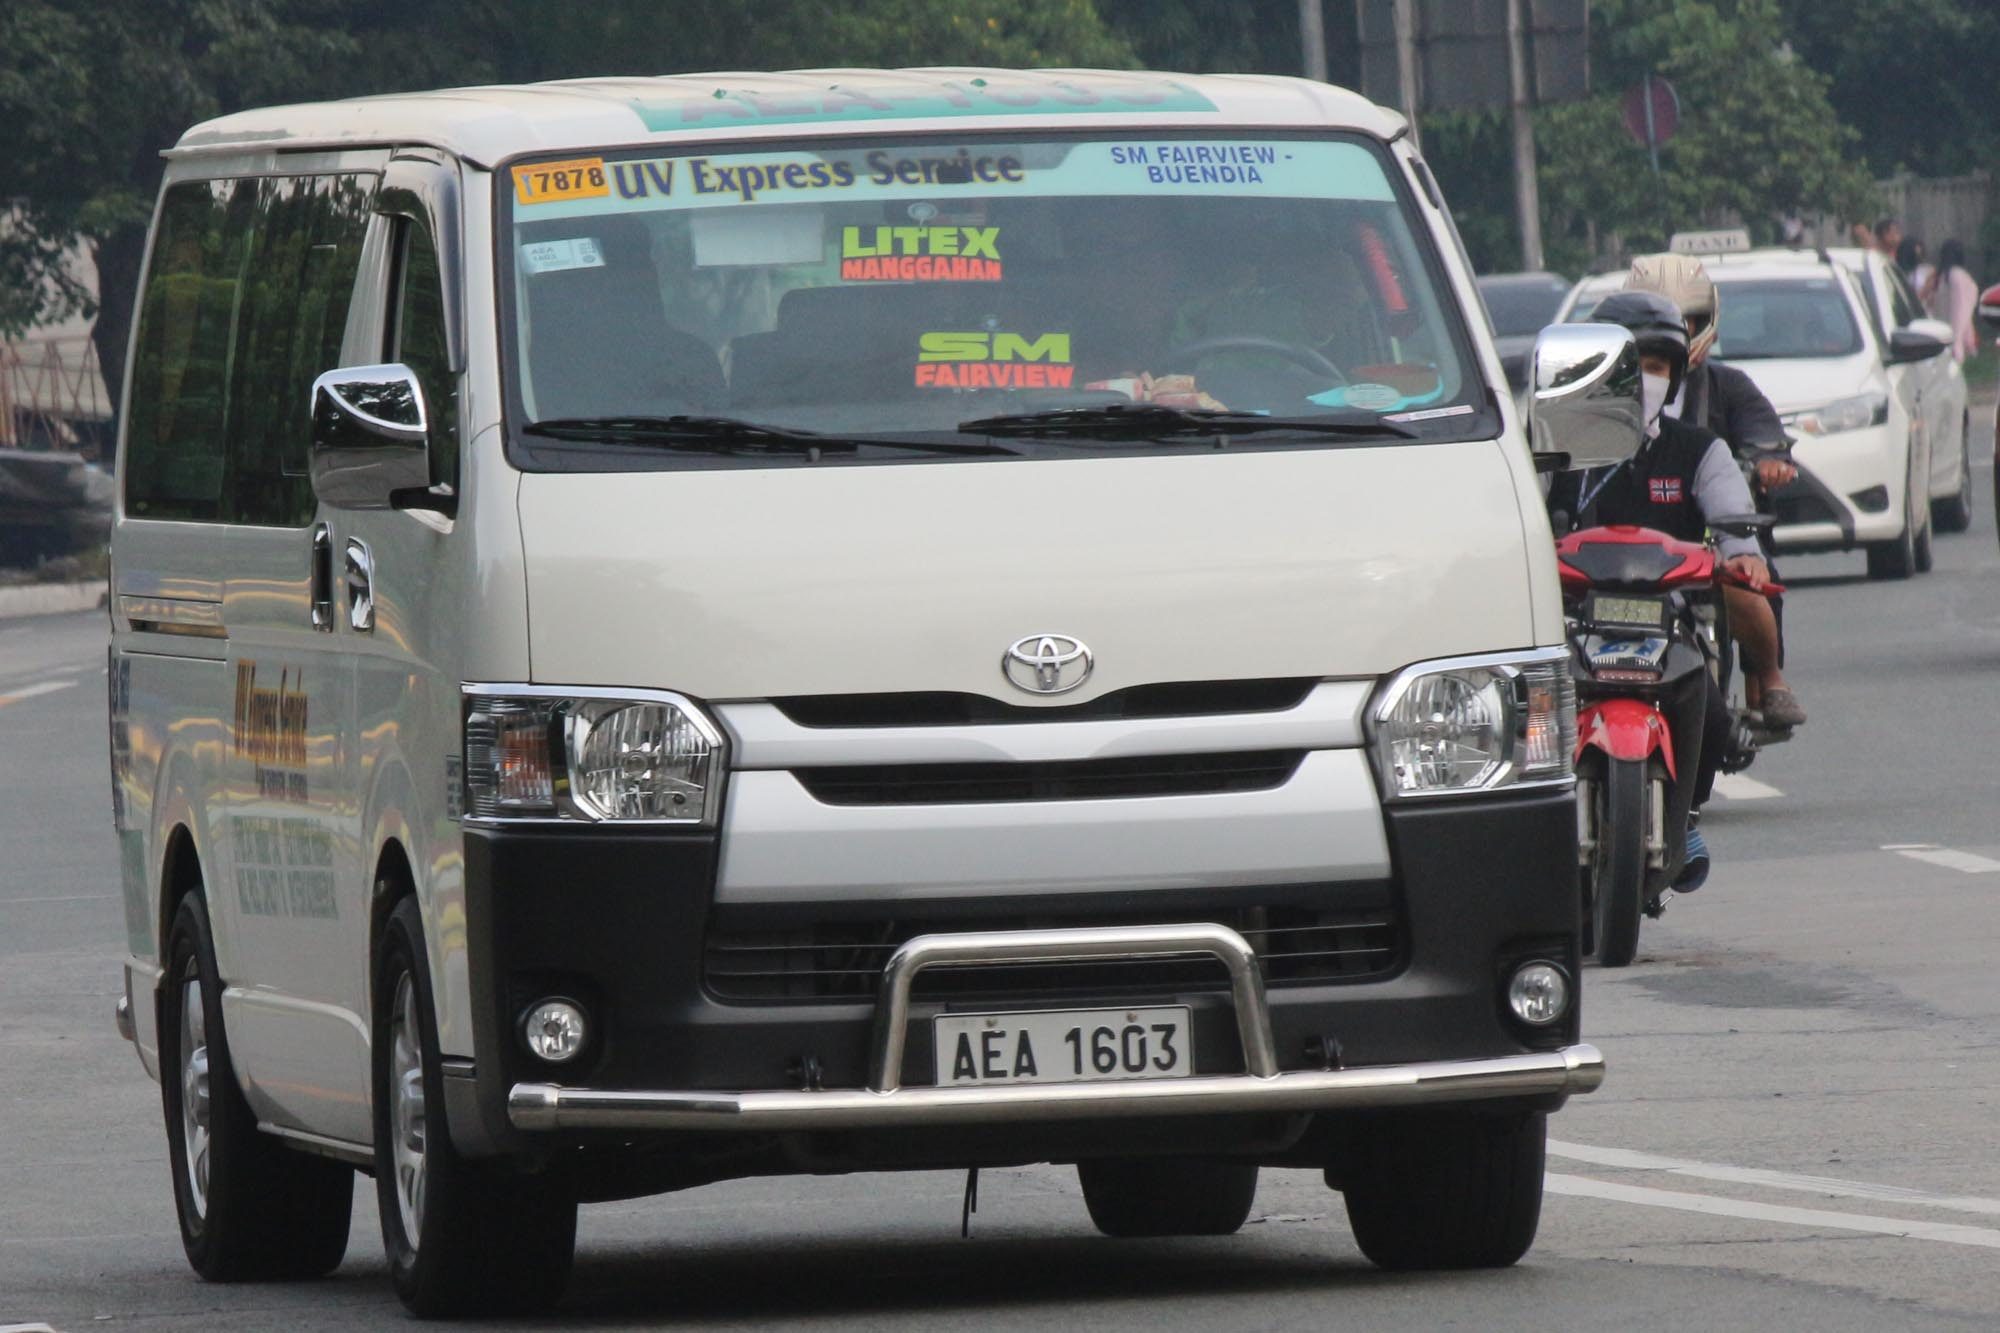 LTFRB defends ban on UV Express routes along EDSA